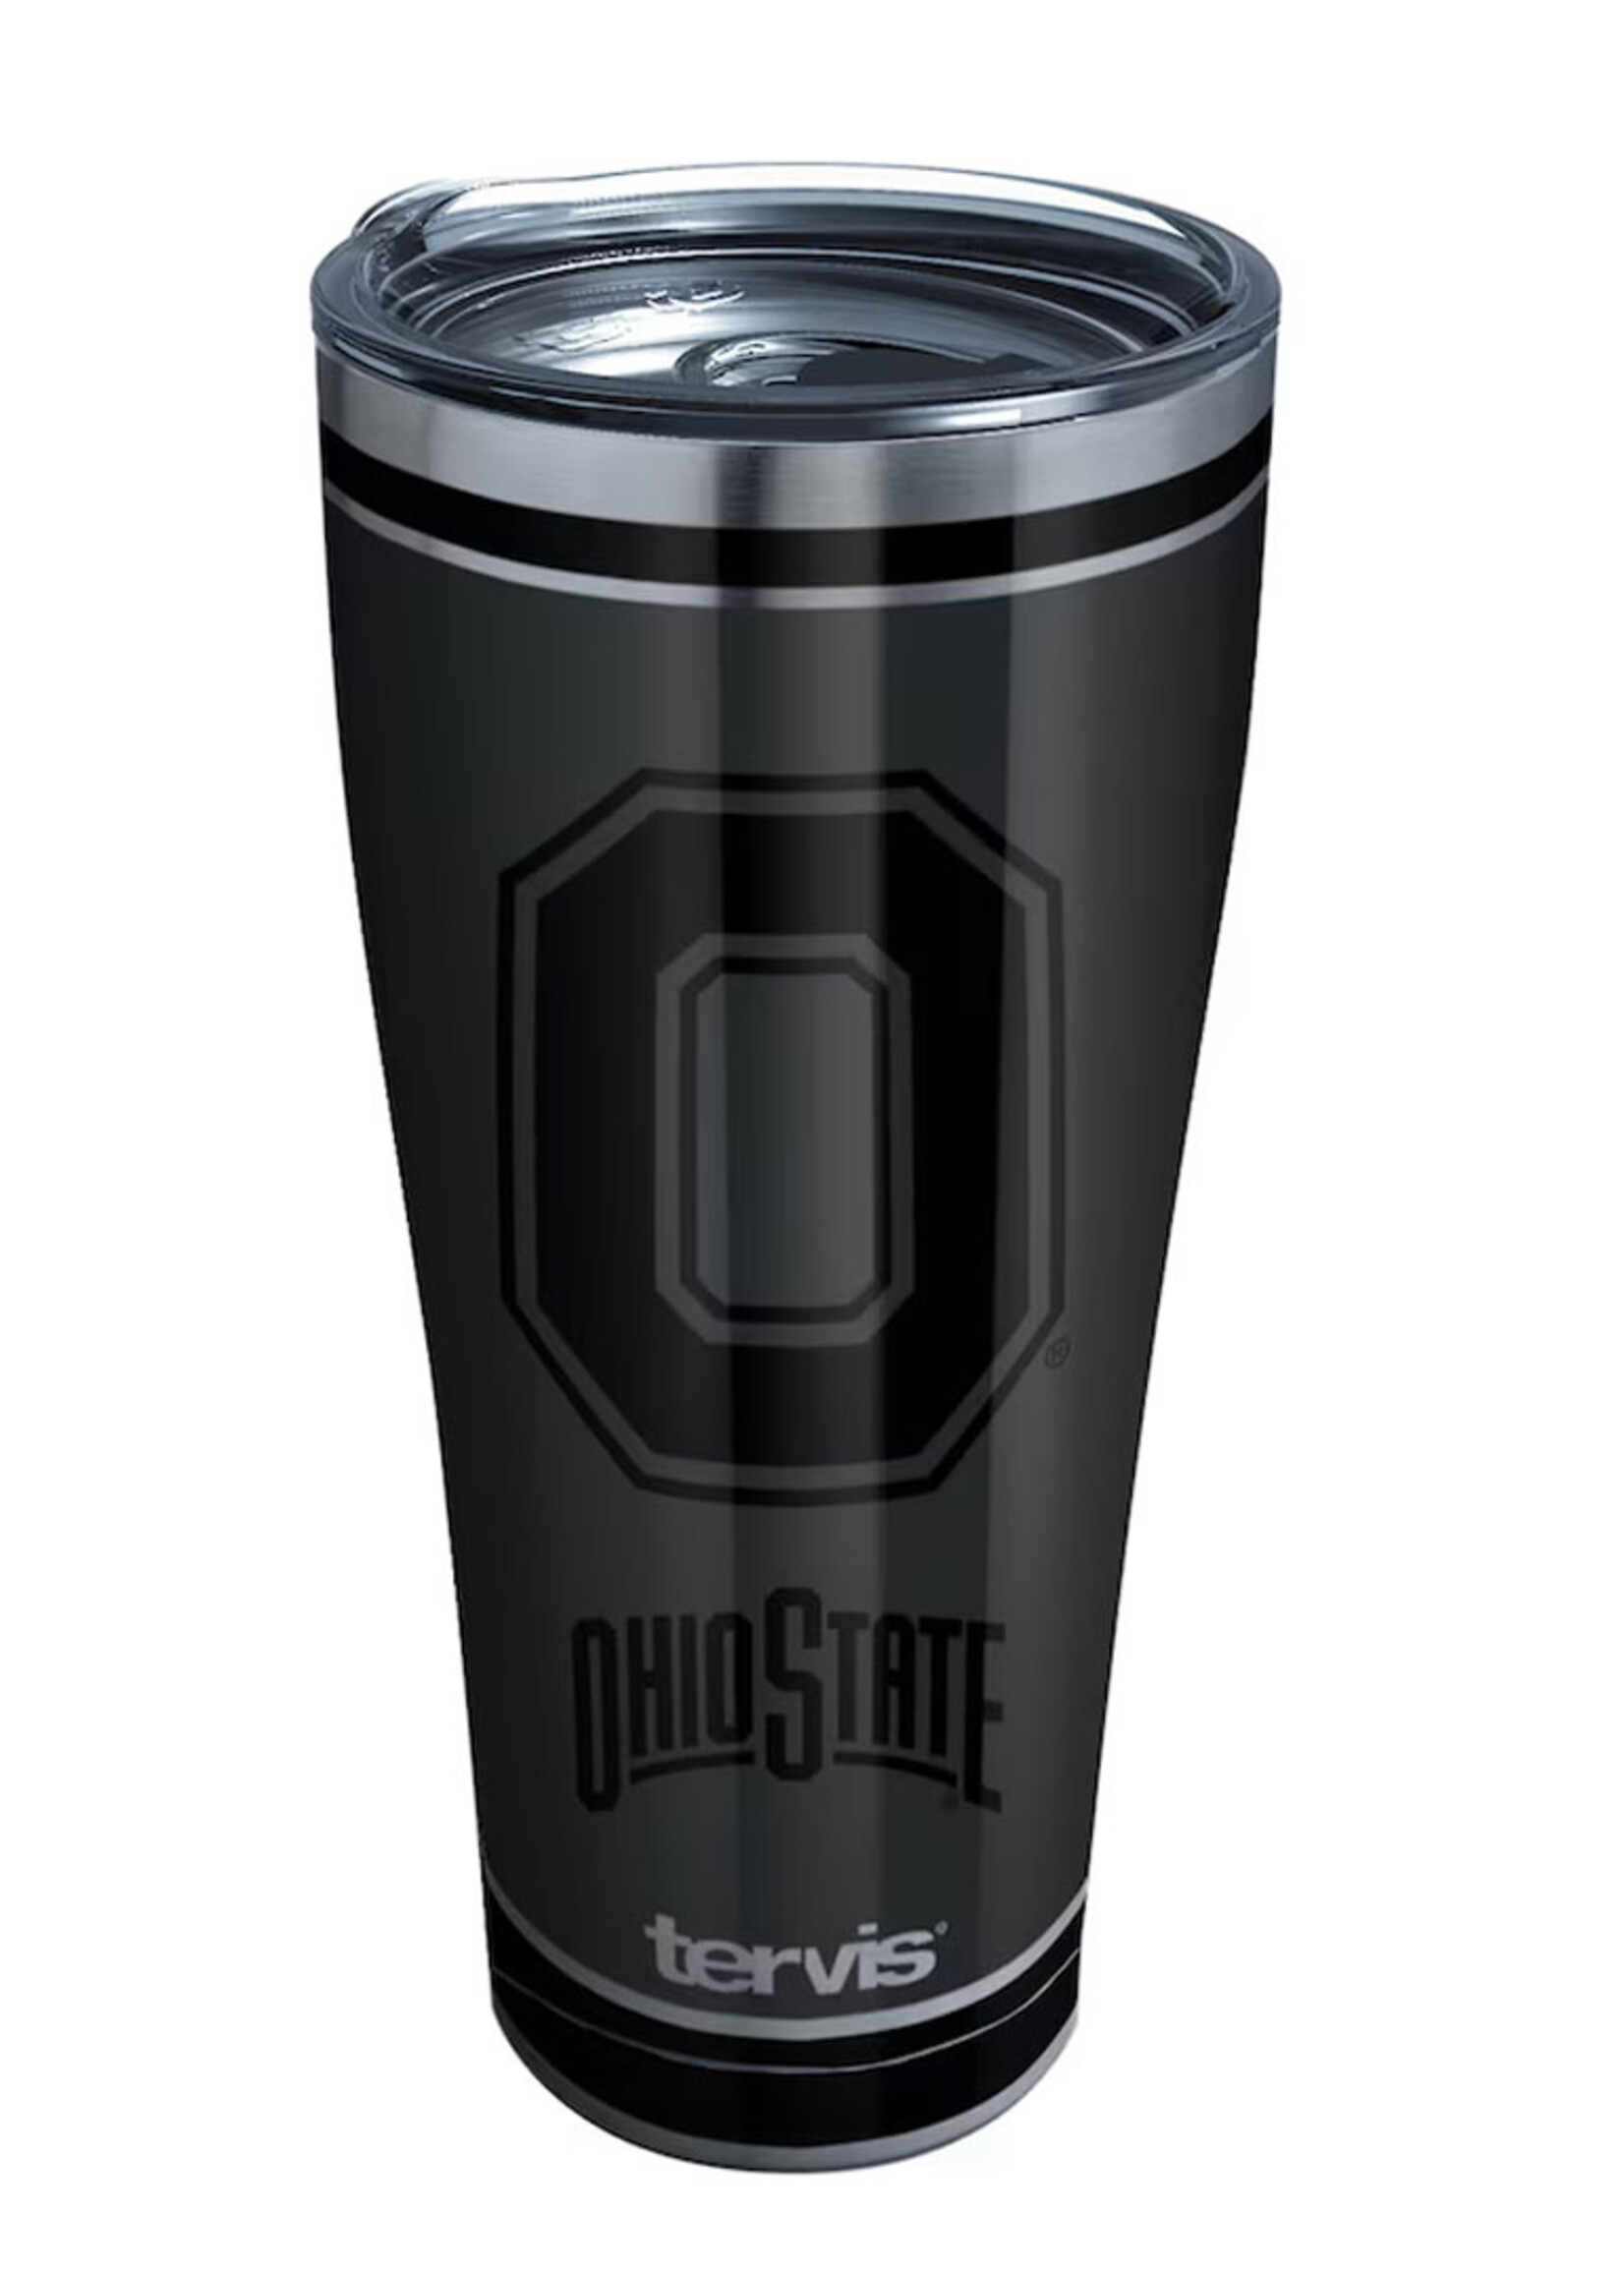 Tervis Cleveland Ohio State MVP Stainless Steel Tumbler - 30 oz